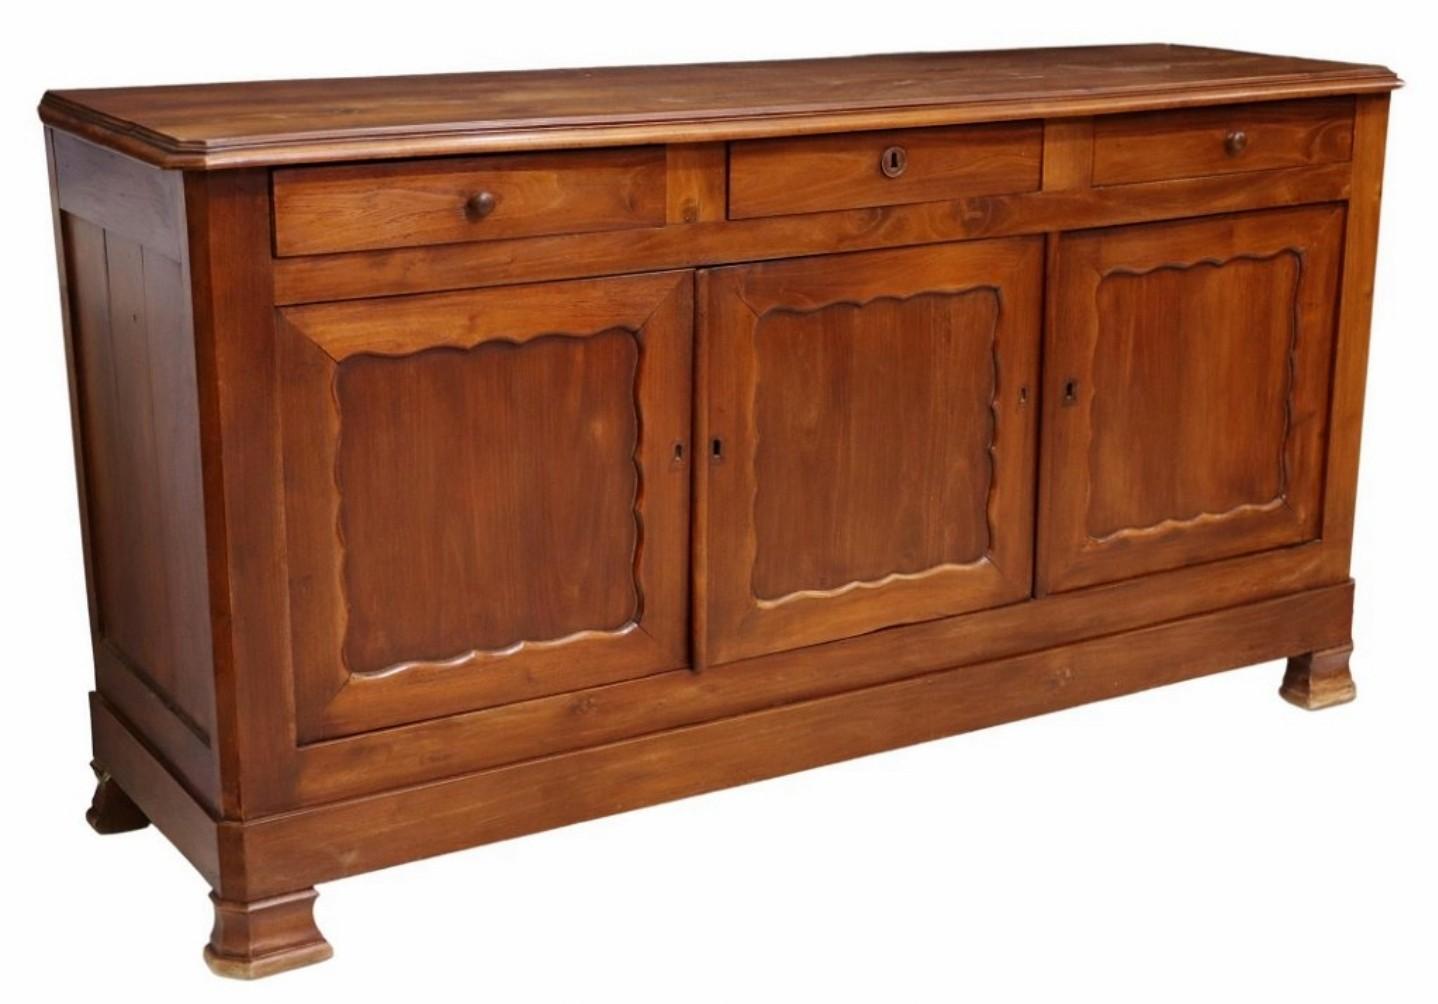 Add a touch of rustic warmth, elegance, and unpretentious sophistication with this antique country French fruitwood enfilade.

Born in Provincial France in the late 19th century, hand-crafted of warm rich solid fruitwood with attractive grain